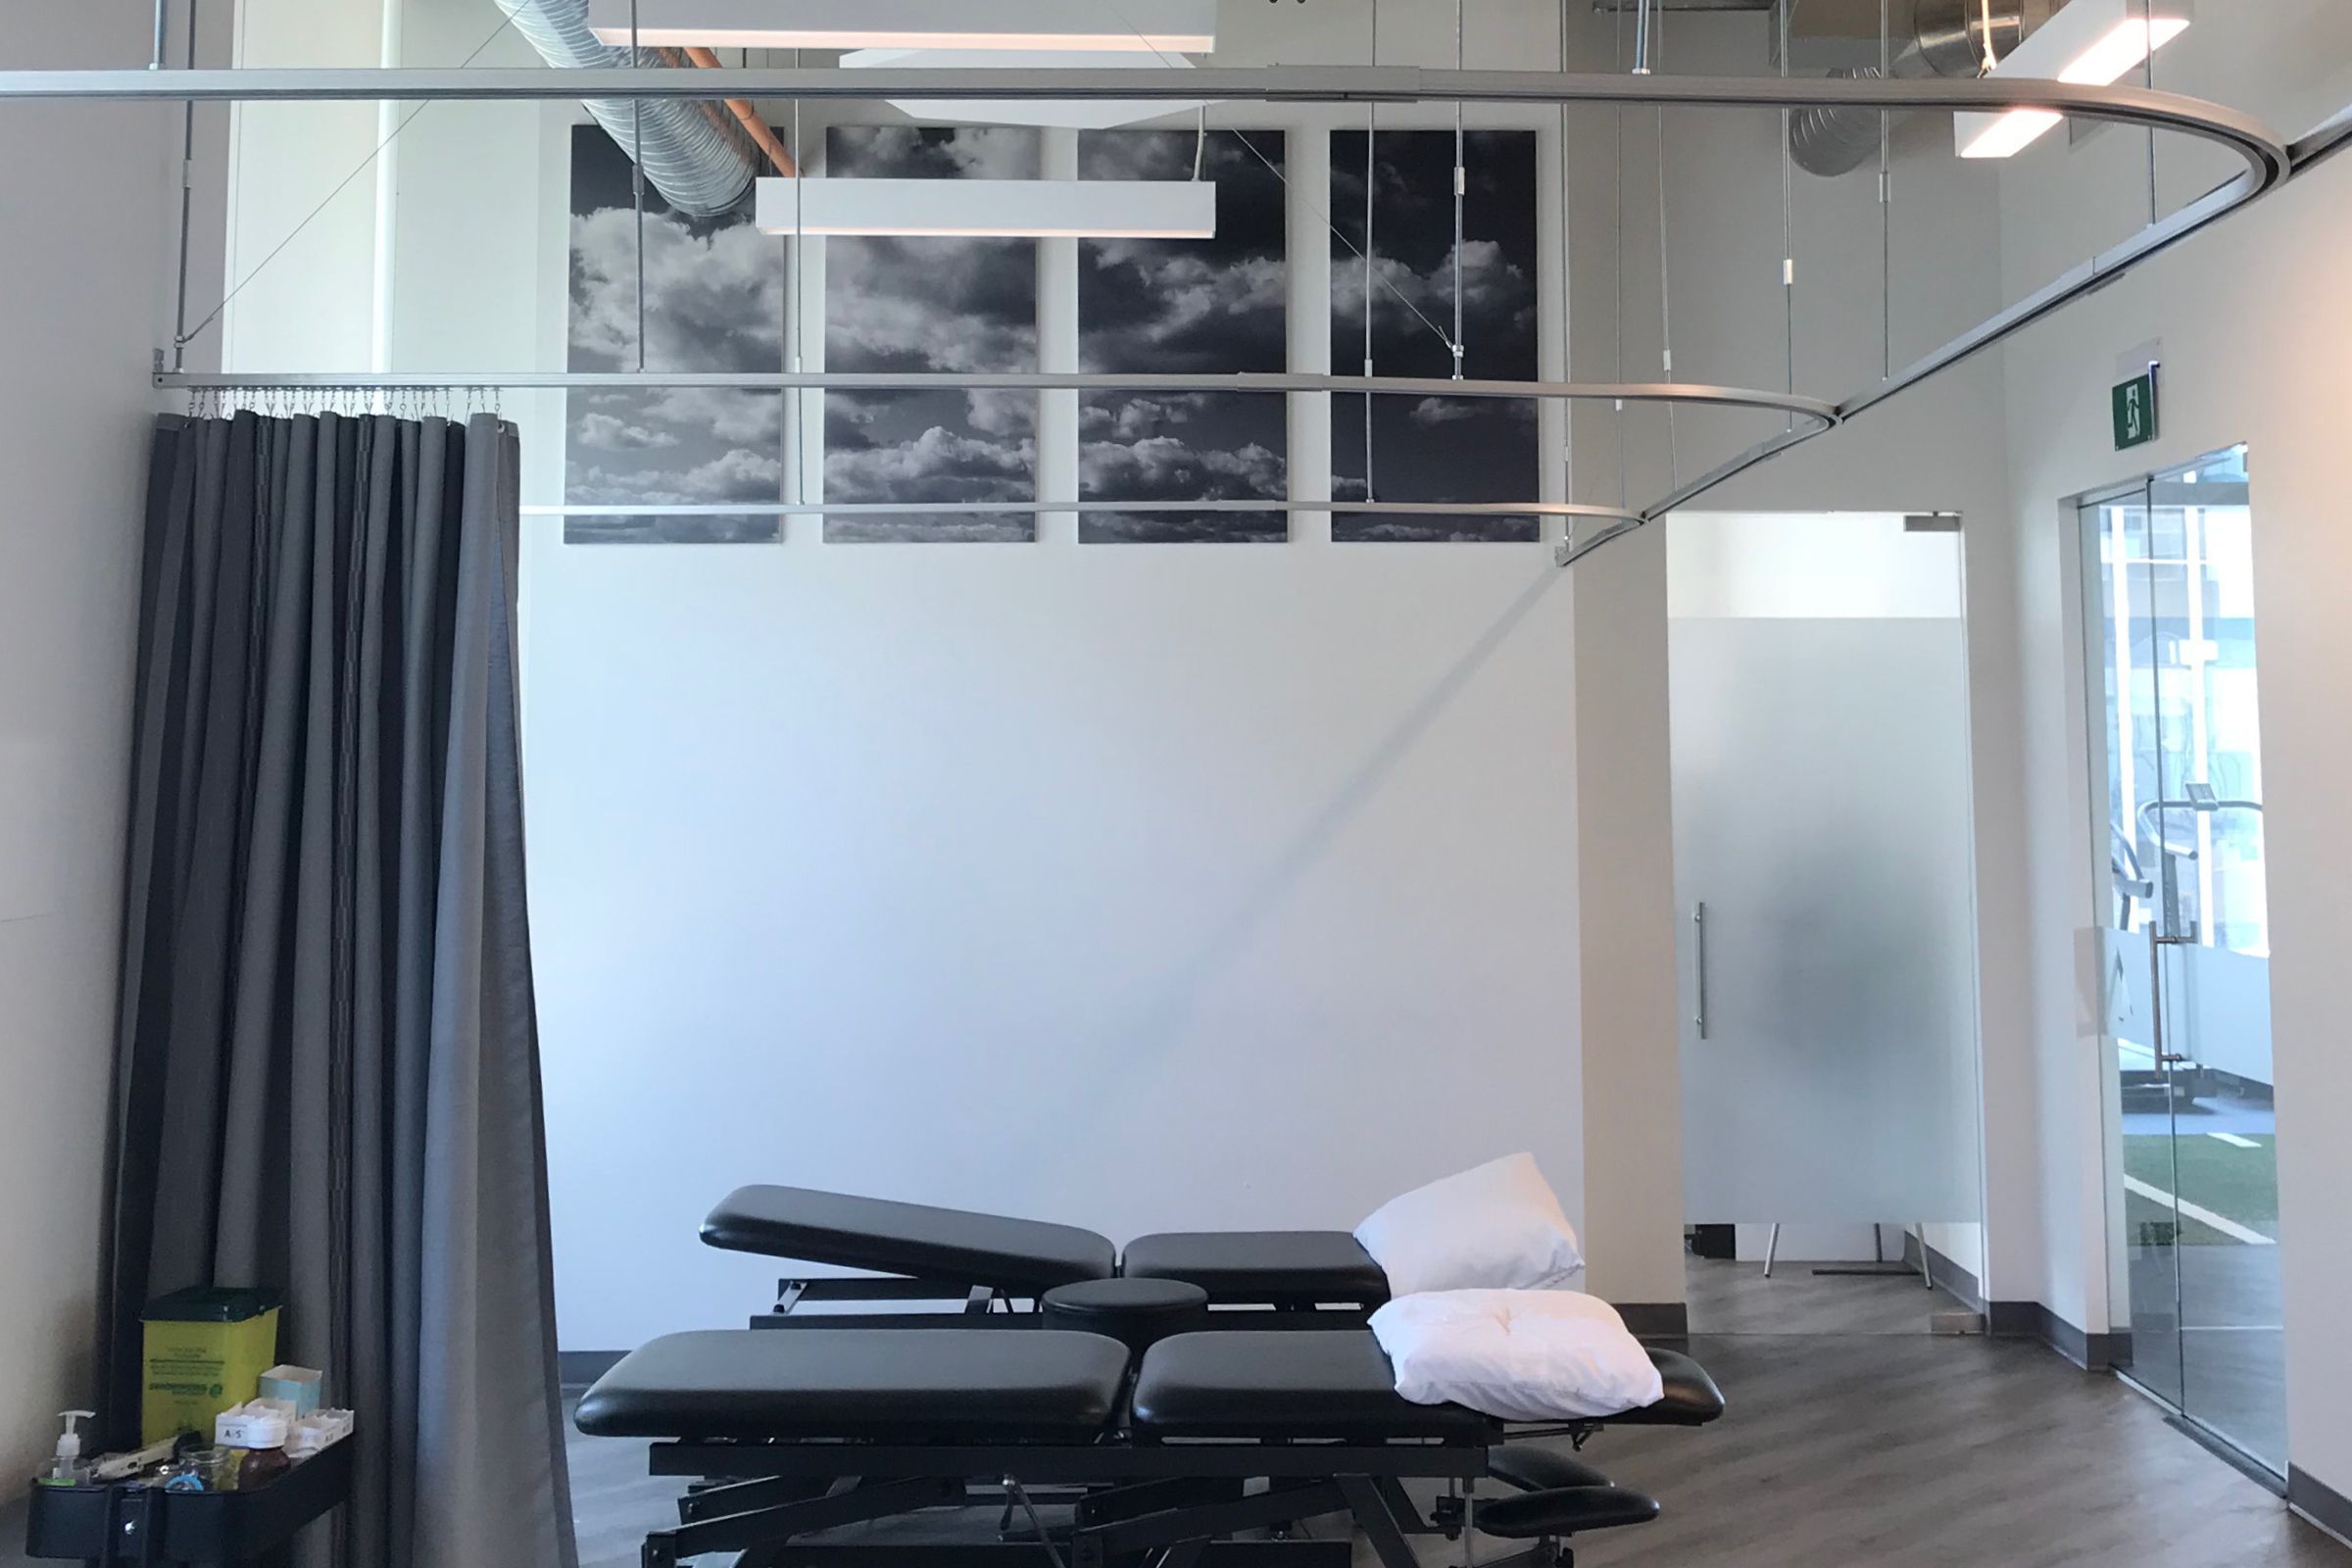 Two black physio beds in open white room with four custom printed acoustic panels on the wall.